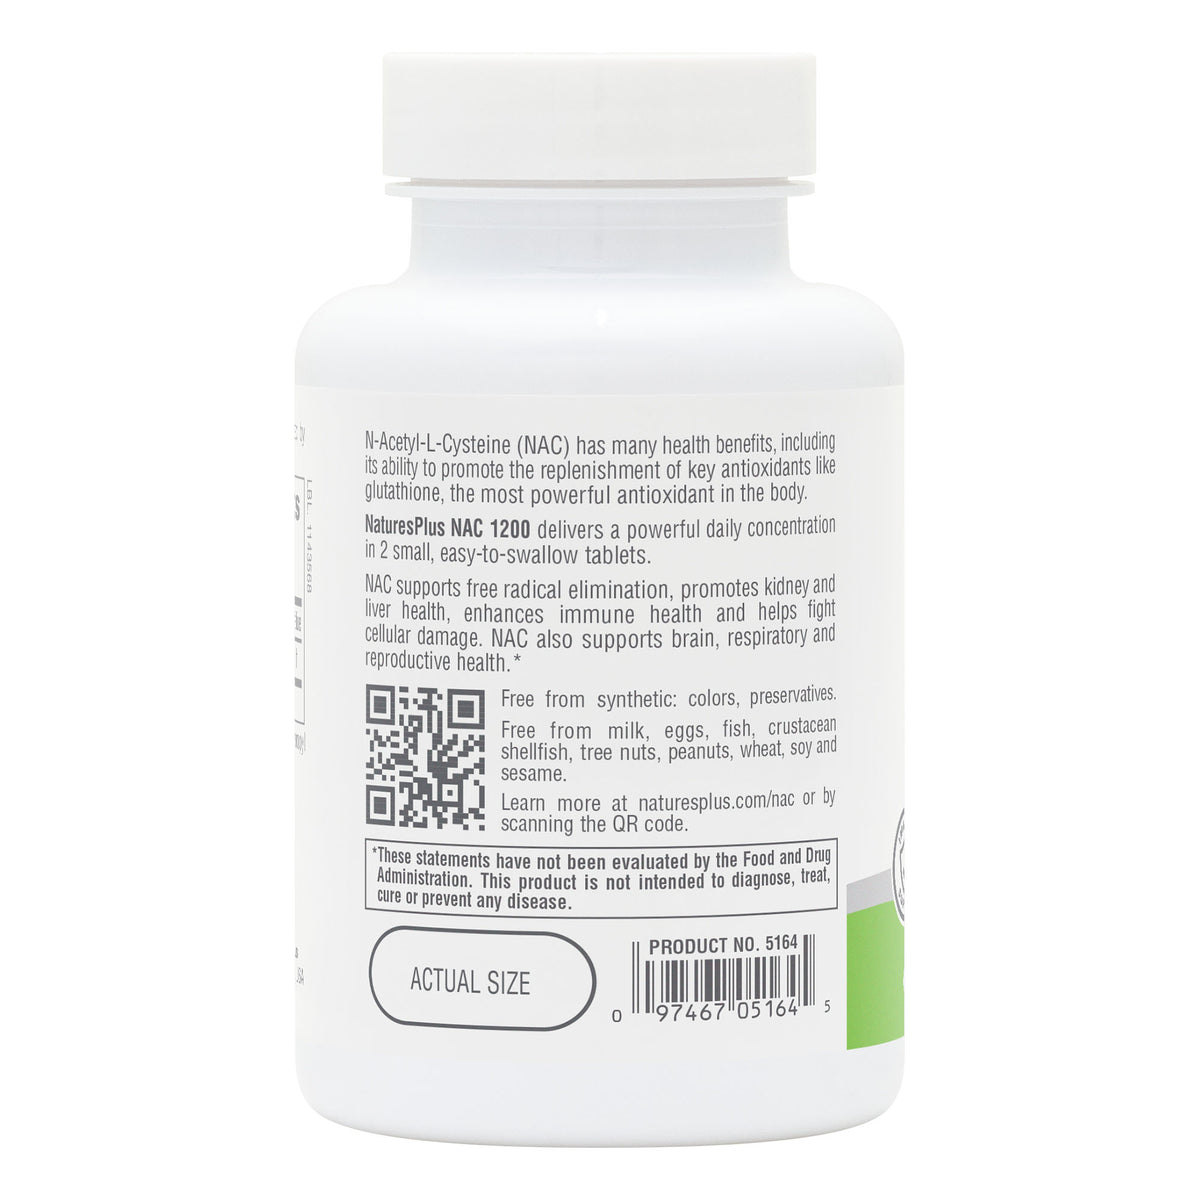 product image of NaturesPlus PRO NAC 1200 Tablets containing 60 Count